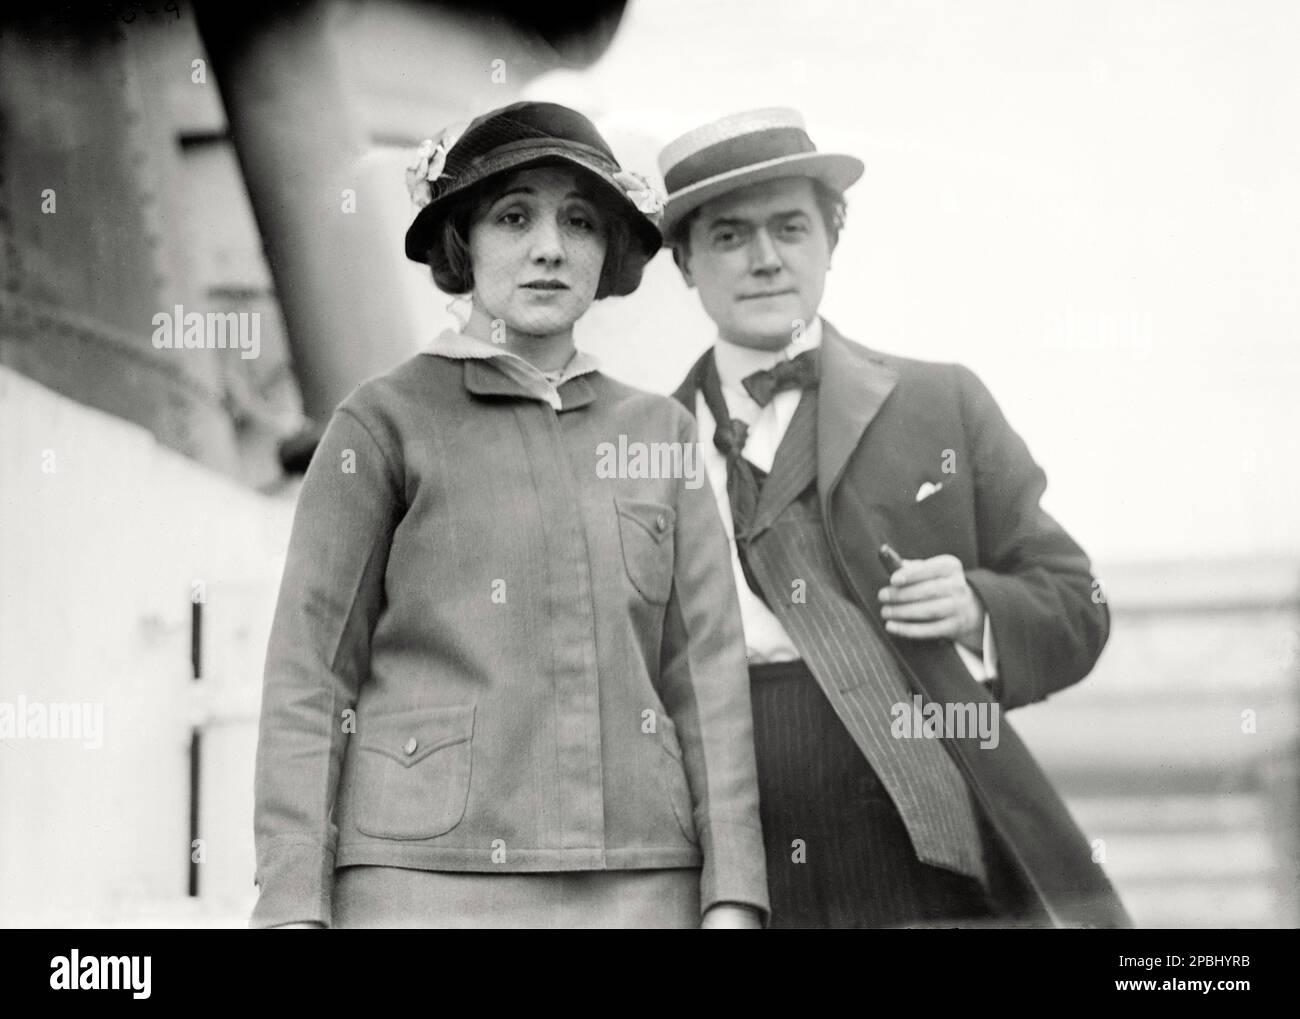 1915 ca , New York , USA  : The celebrated american  silent movie and thatre actress  LAURETTE TAYLOR ( 1884 - 1946 ) with housband HARTLEY MANNERS . John Hartley Manners ( 1870 – 1928 ) was a British playwright who wrote ' Peg o' My Heart ' , which starred his wife, Laurette Taylor on Broadway in one of her greatest stage triumphs. He wrote the 1922 silent screen adaptation of Peg o' My Heart which starred Laurette. The 1932 sound remake starring Marion Davies was adapted from Manners play as Manners had died in 1928. Manners also wrote two 1924 silent film screenplays which starred his wife Stock Photo